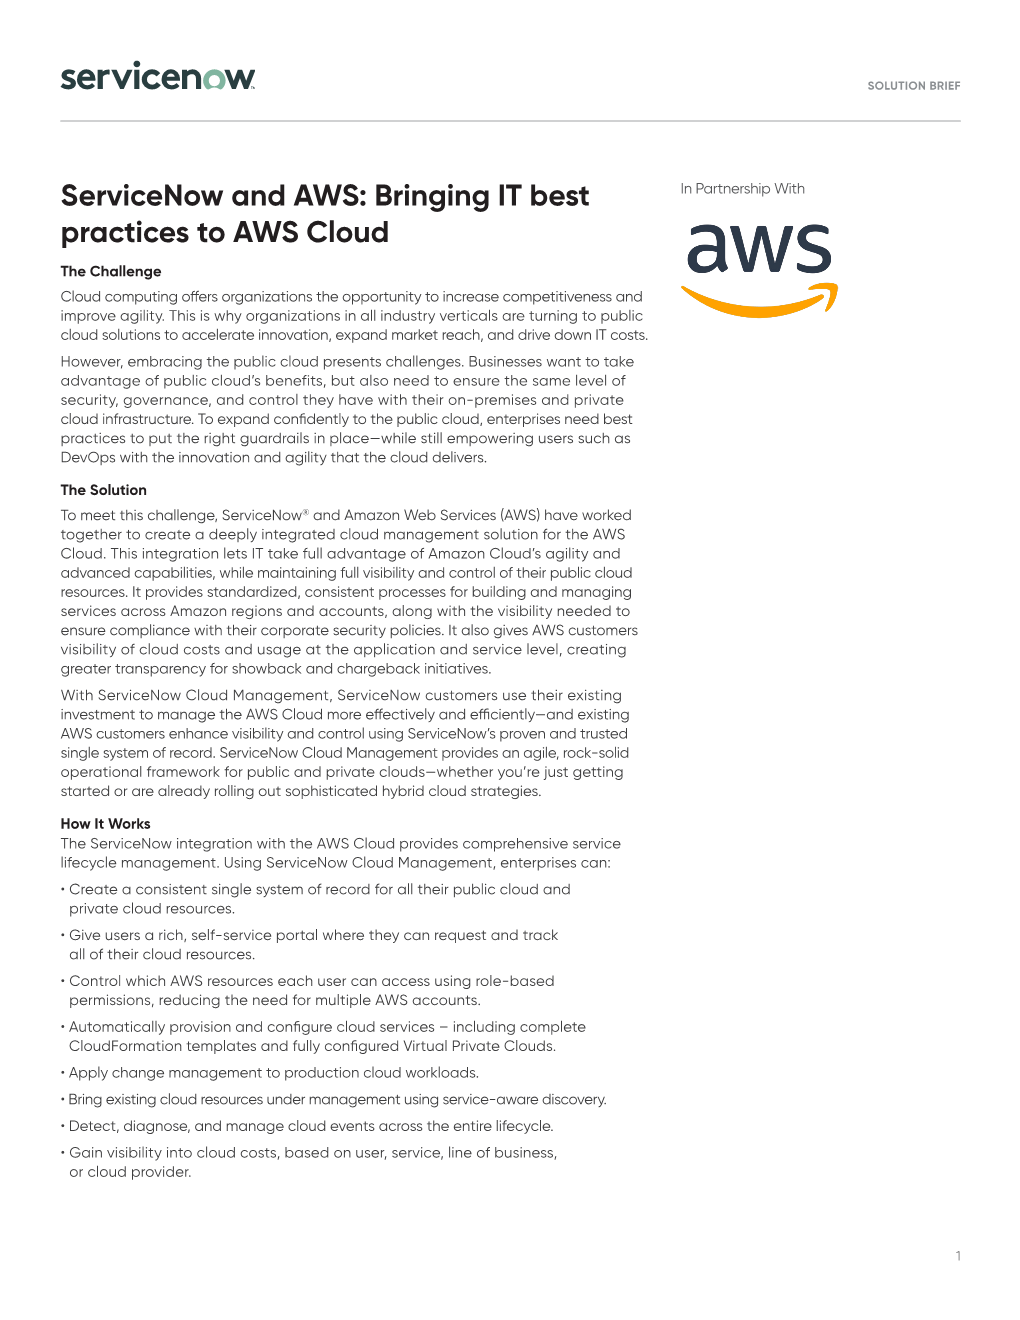 Servicenow and AWS: Bringing IT Best Practices to AWS Cloud